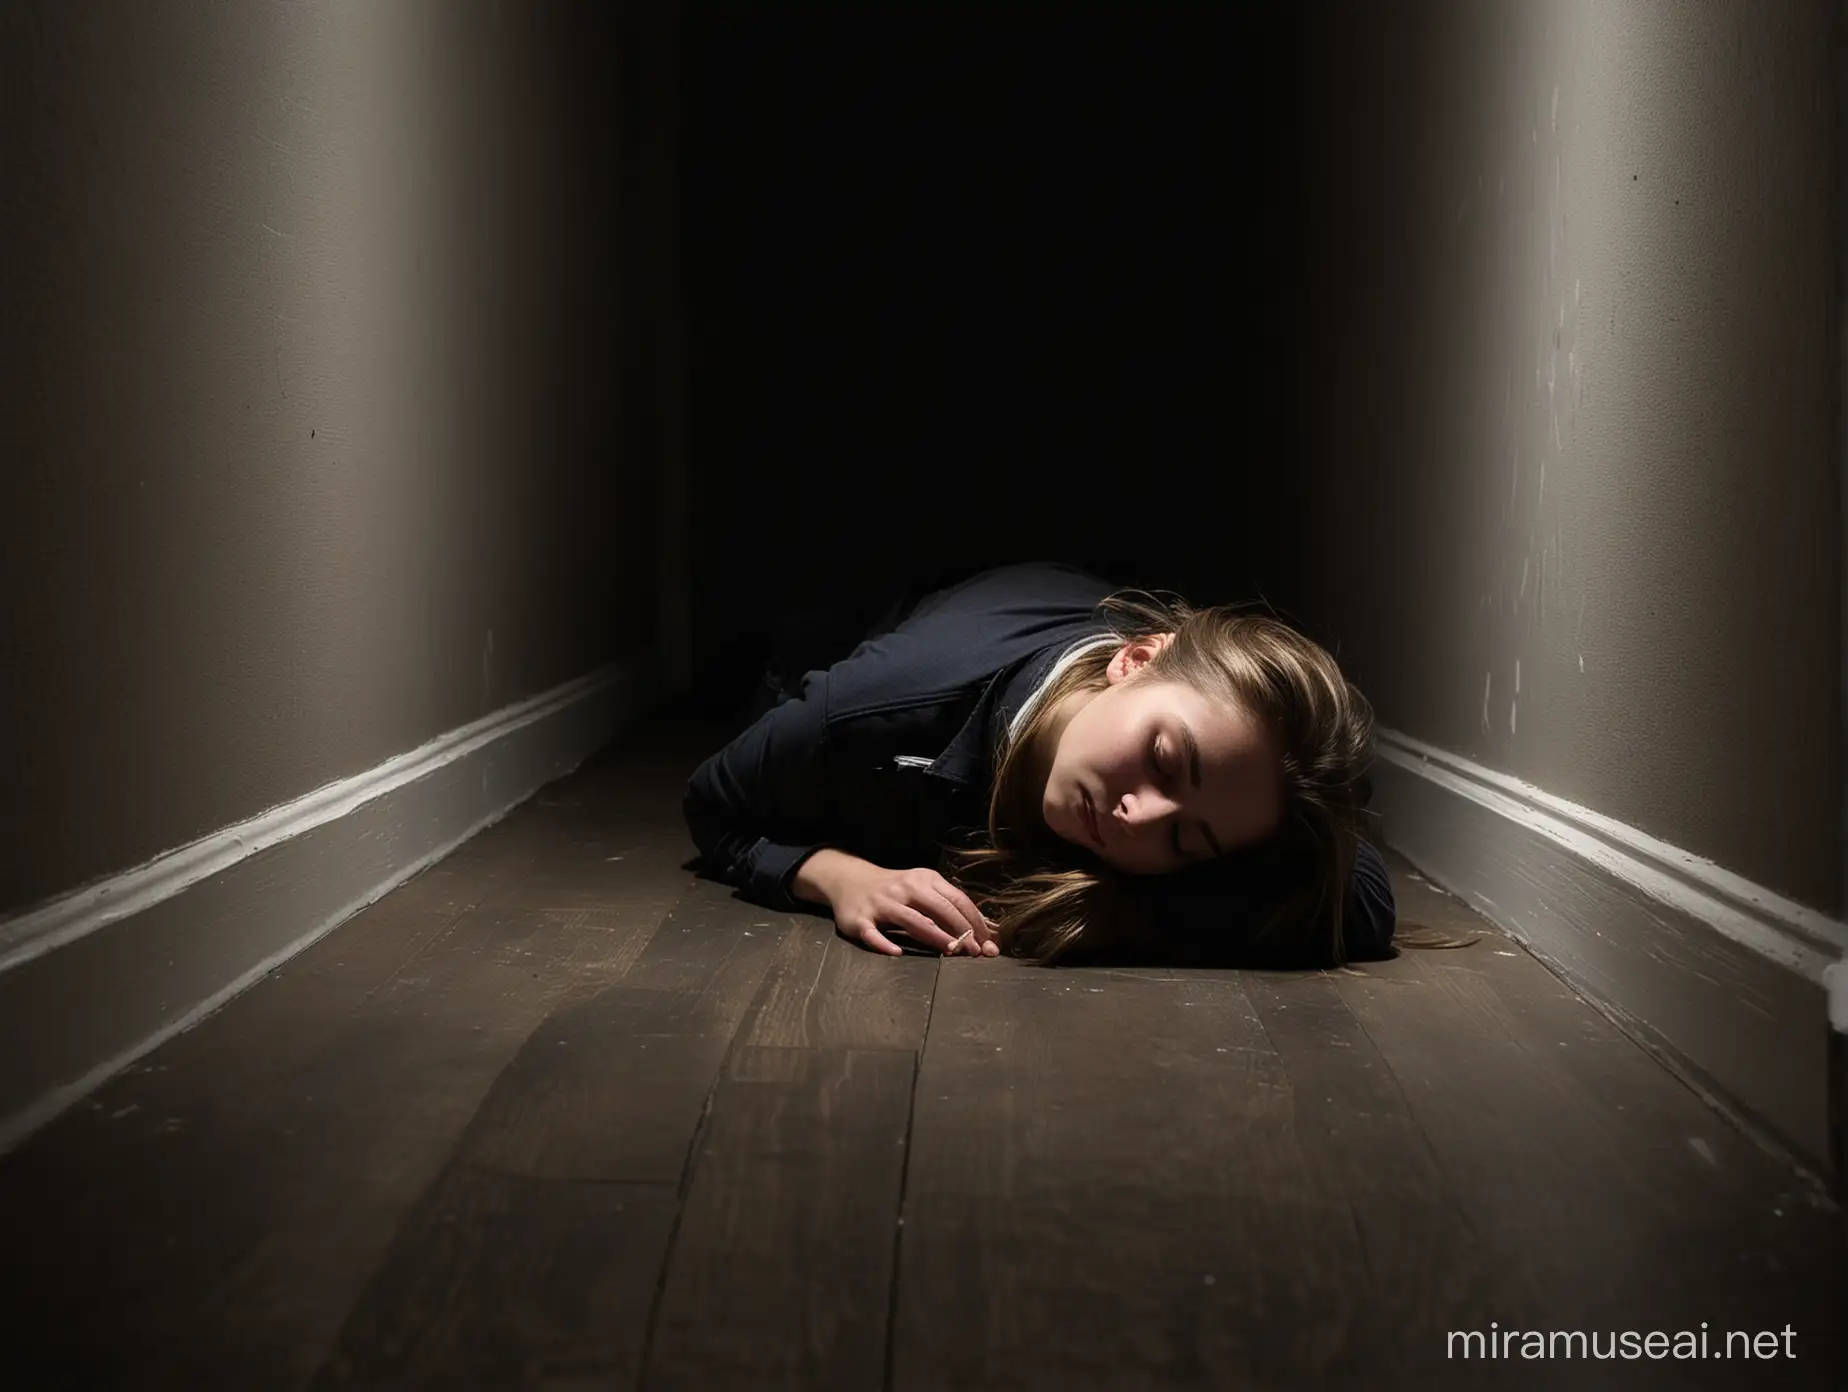 Unconscious Teenager in Dark Room at Night